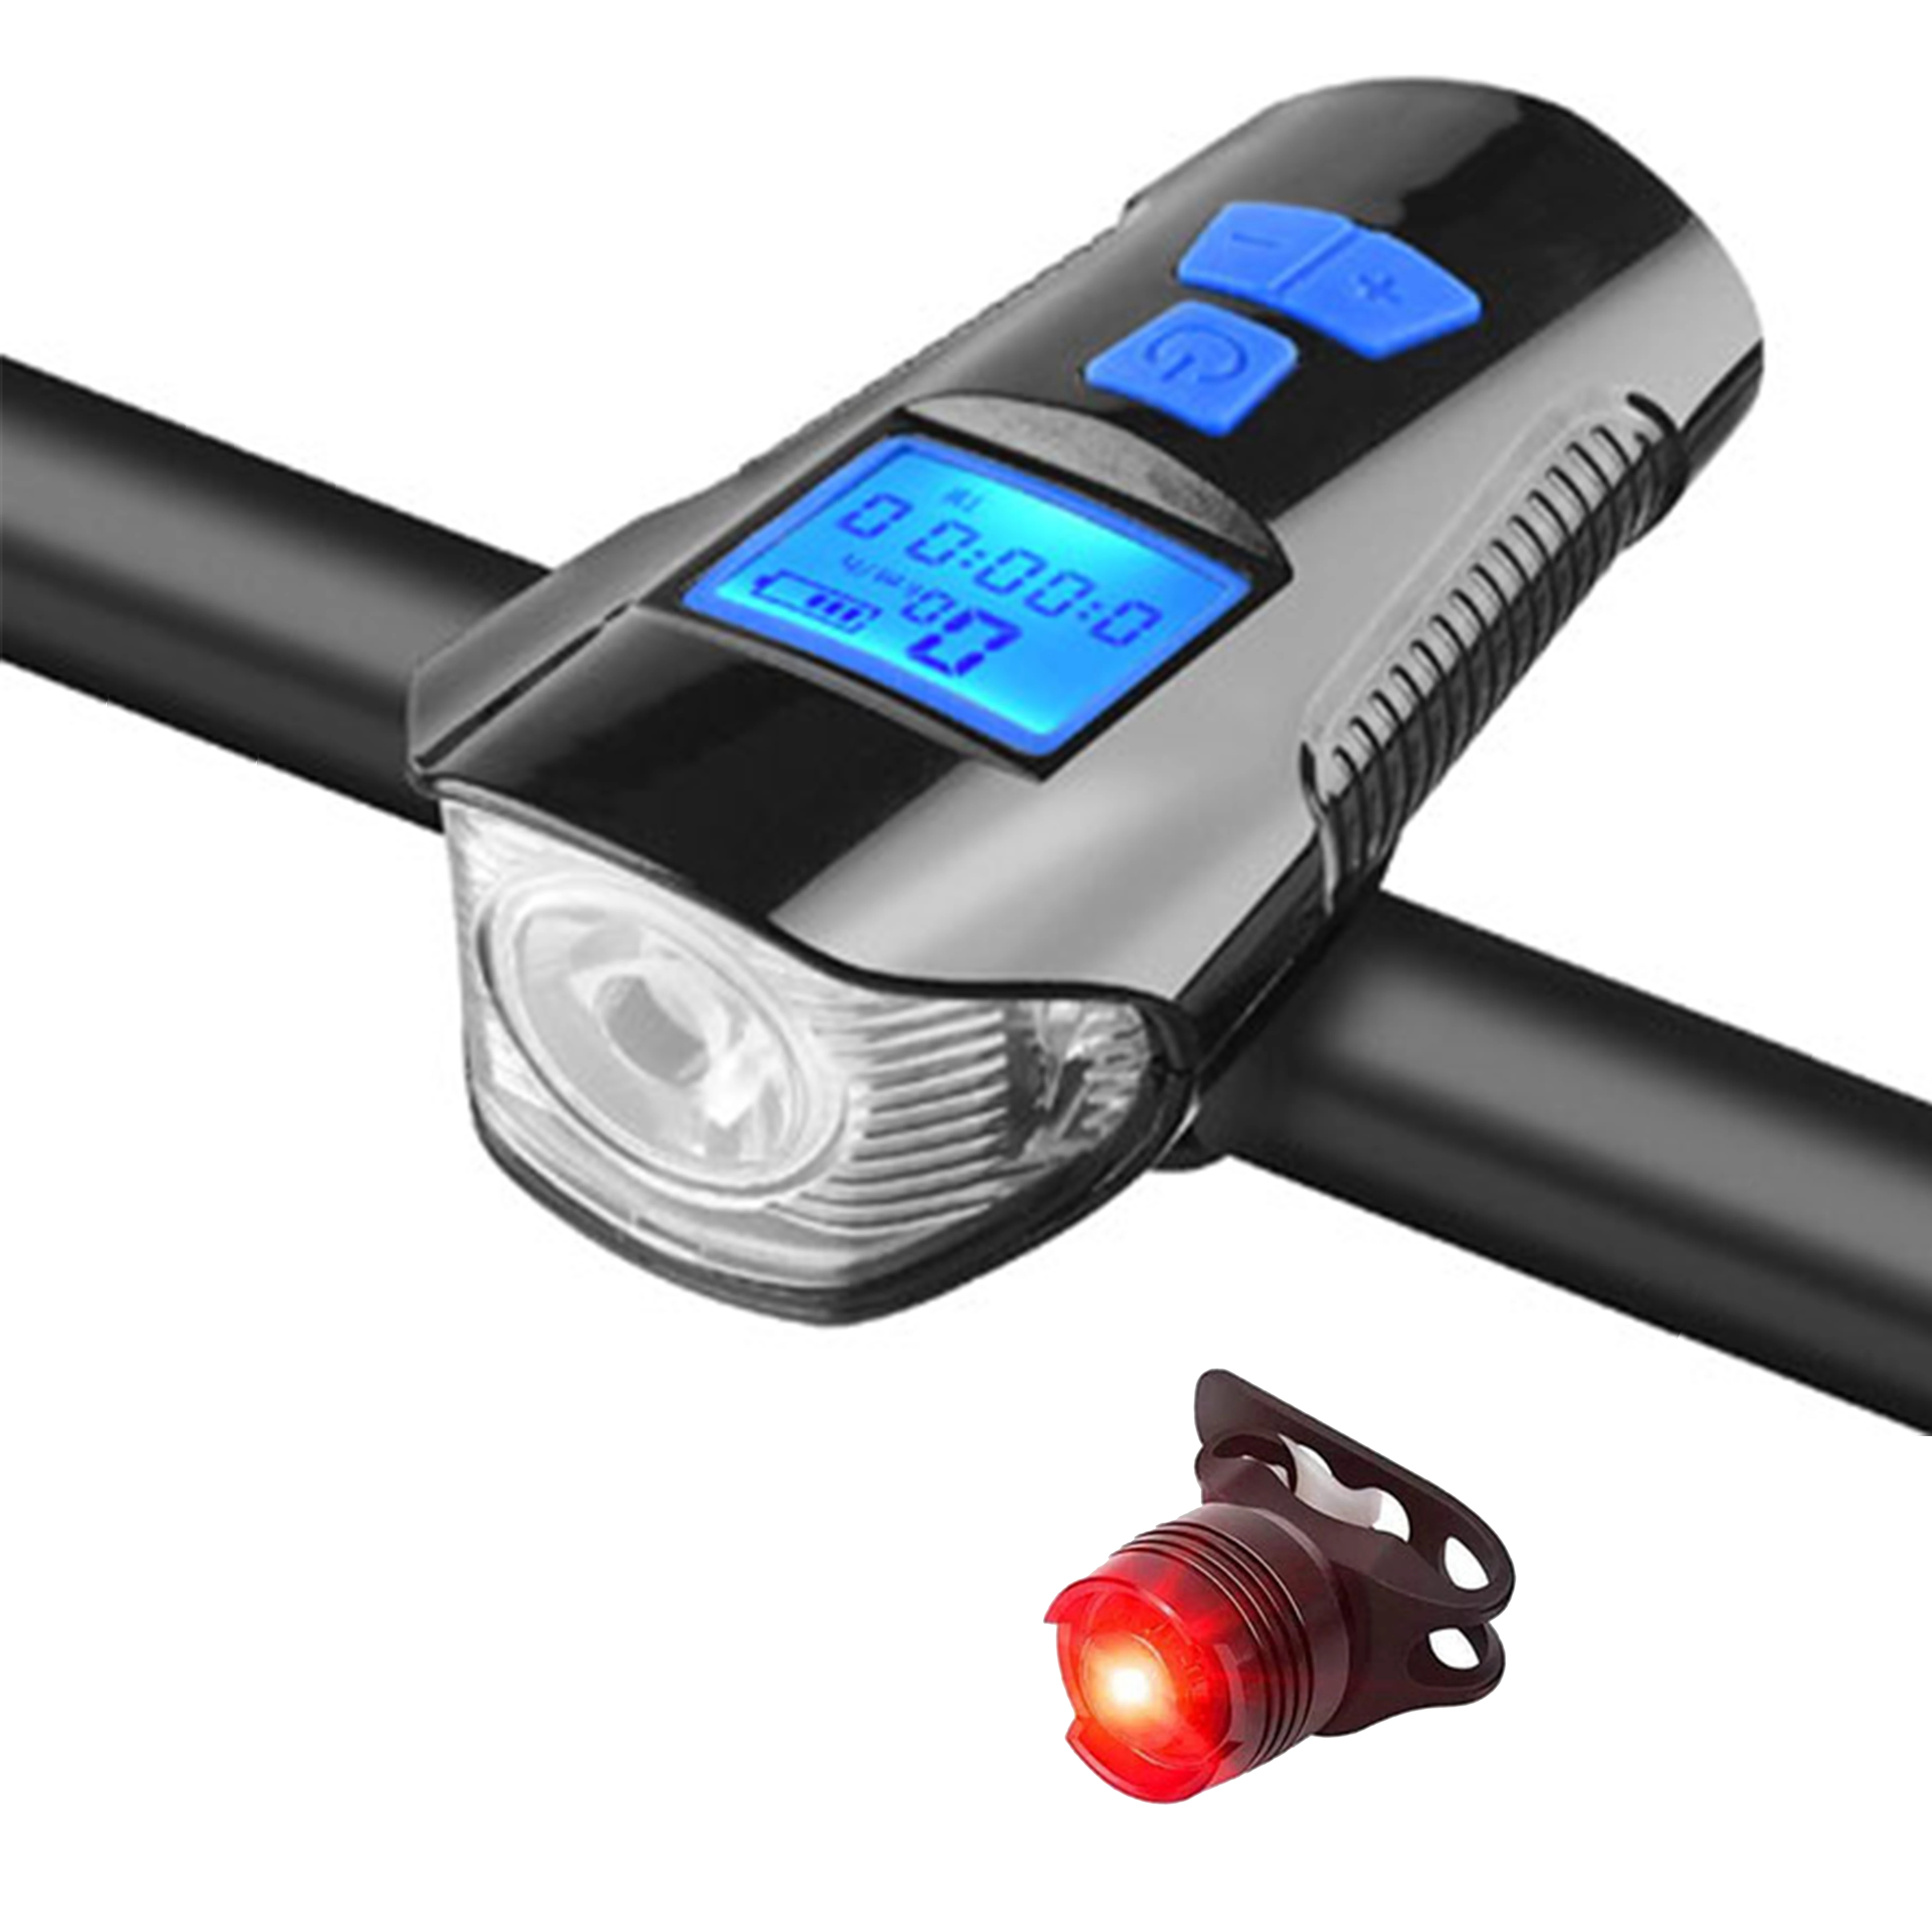 

Hot Sale Aluminum Alloy Waterproof 5 Mode LED Cycle Light Bicycles Laser Bike Light With Speedometer And Horn, Black